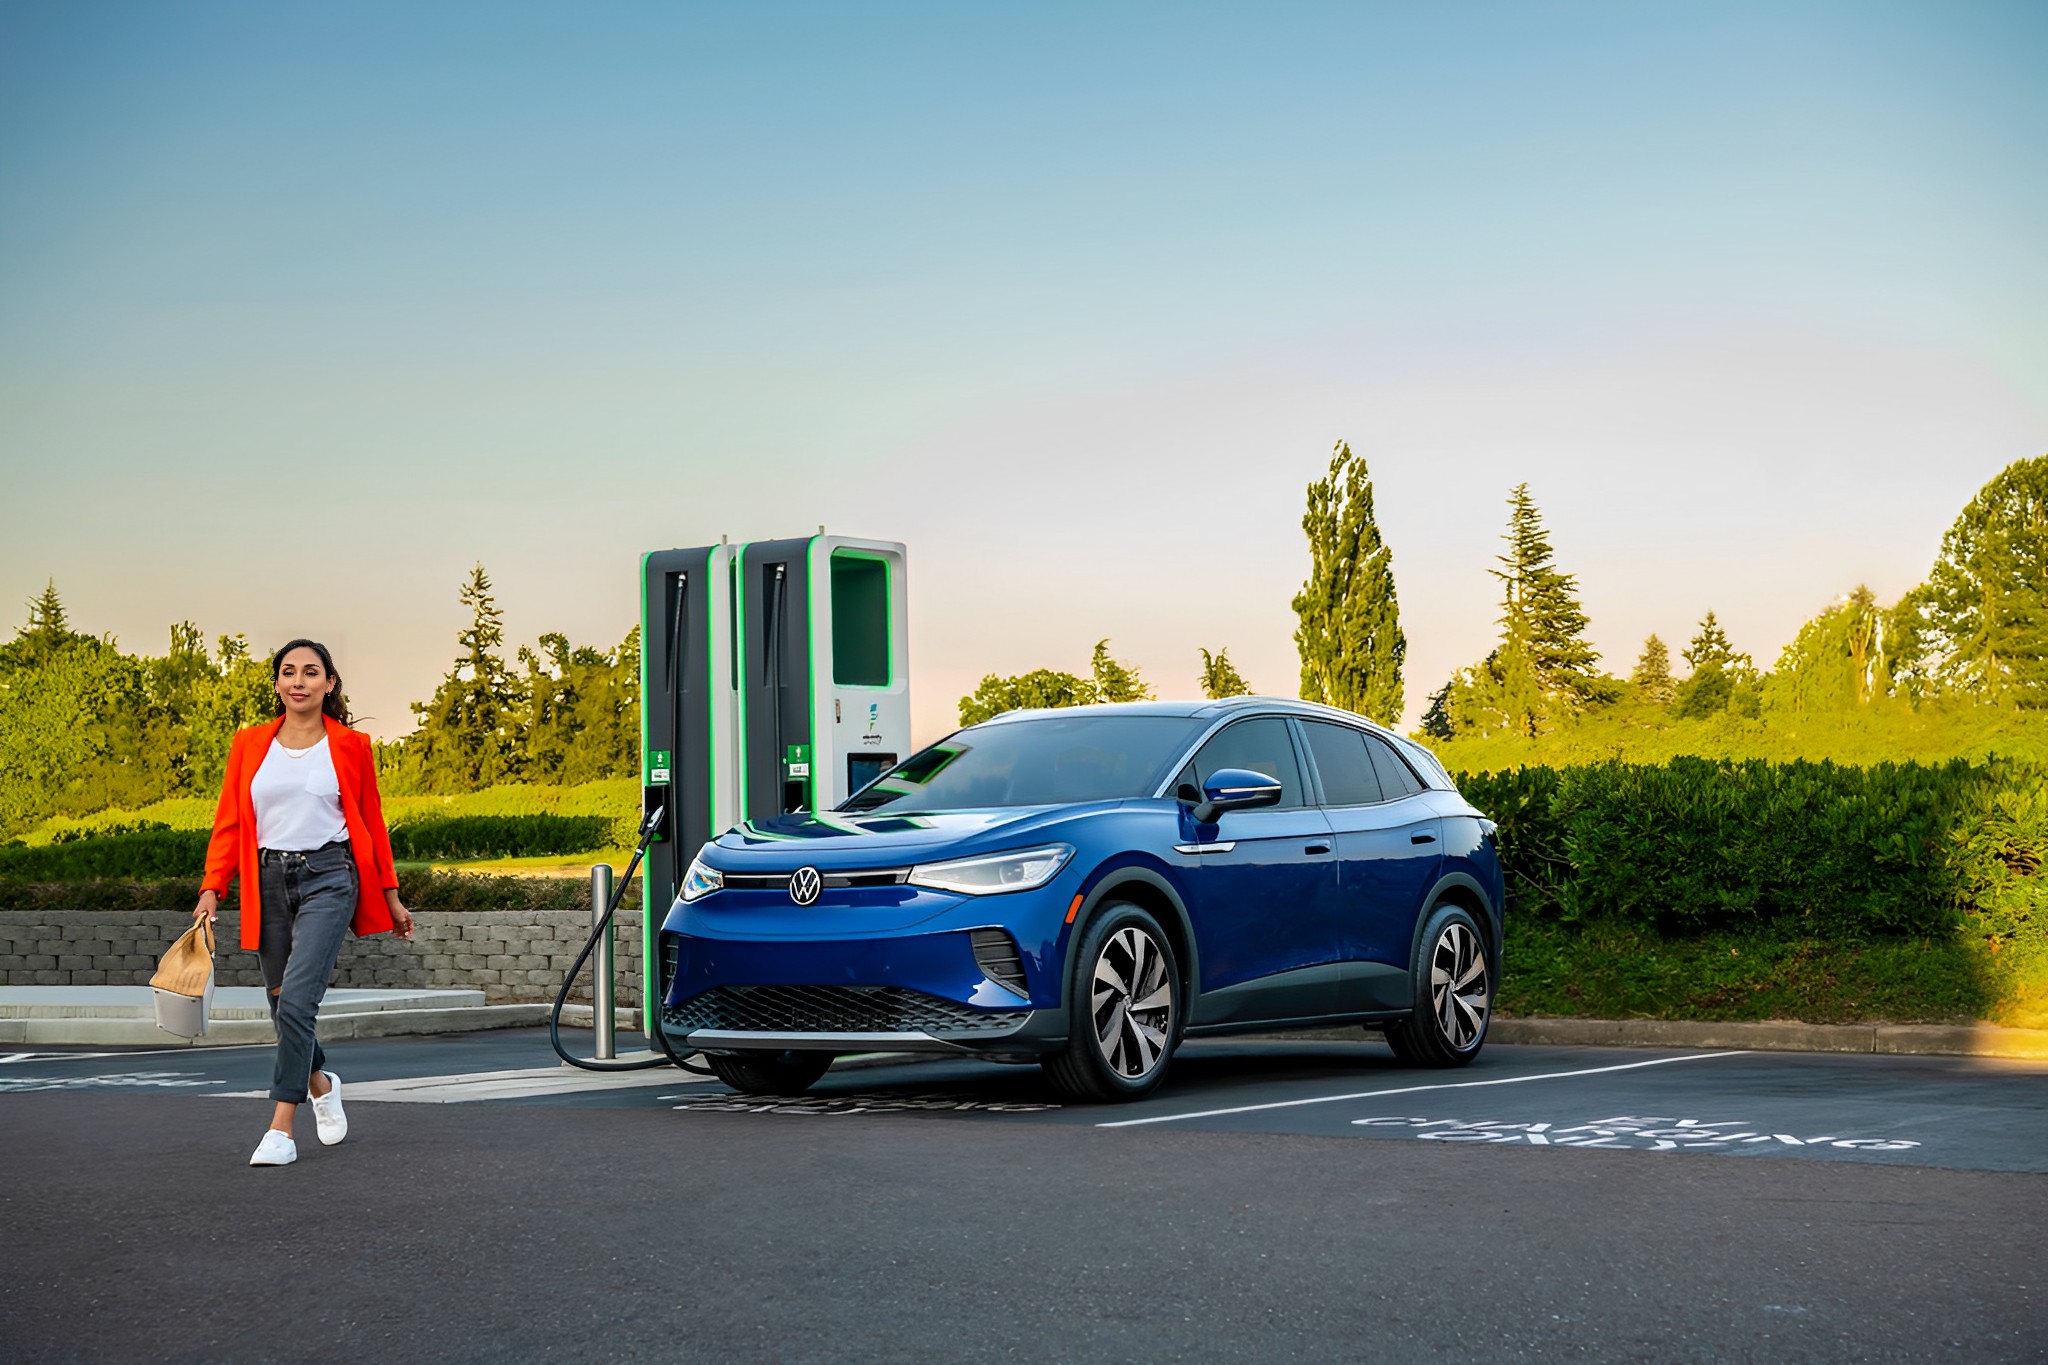 https://e-vehicleinfo.com/global/volkswagen-id-4-electric-car-price-range-and-features/